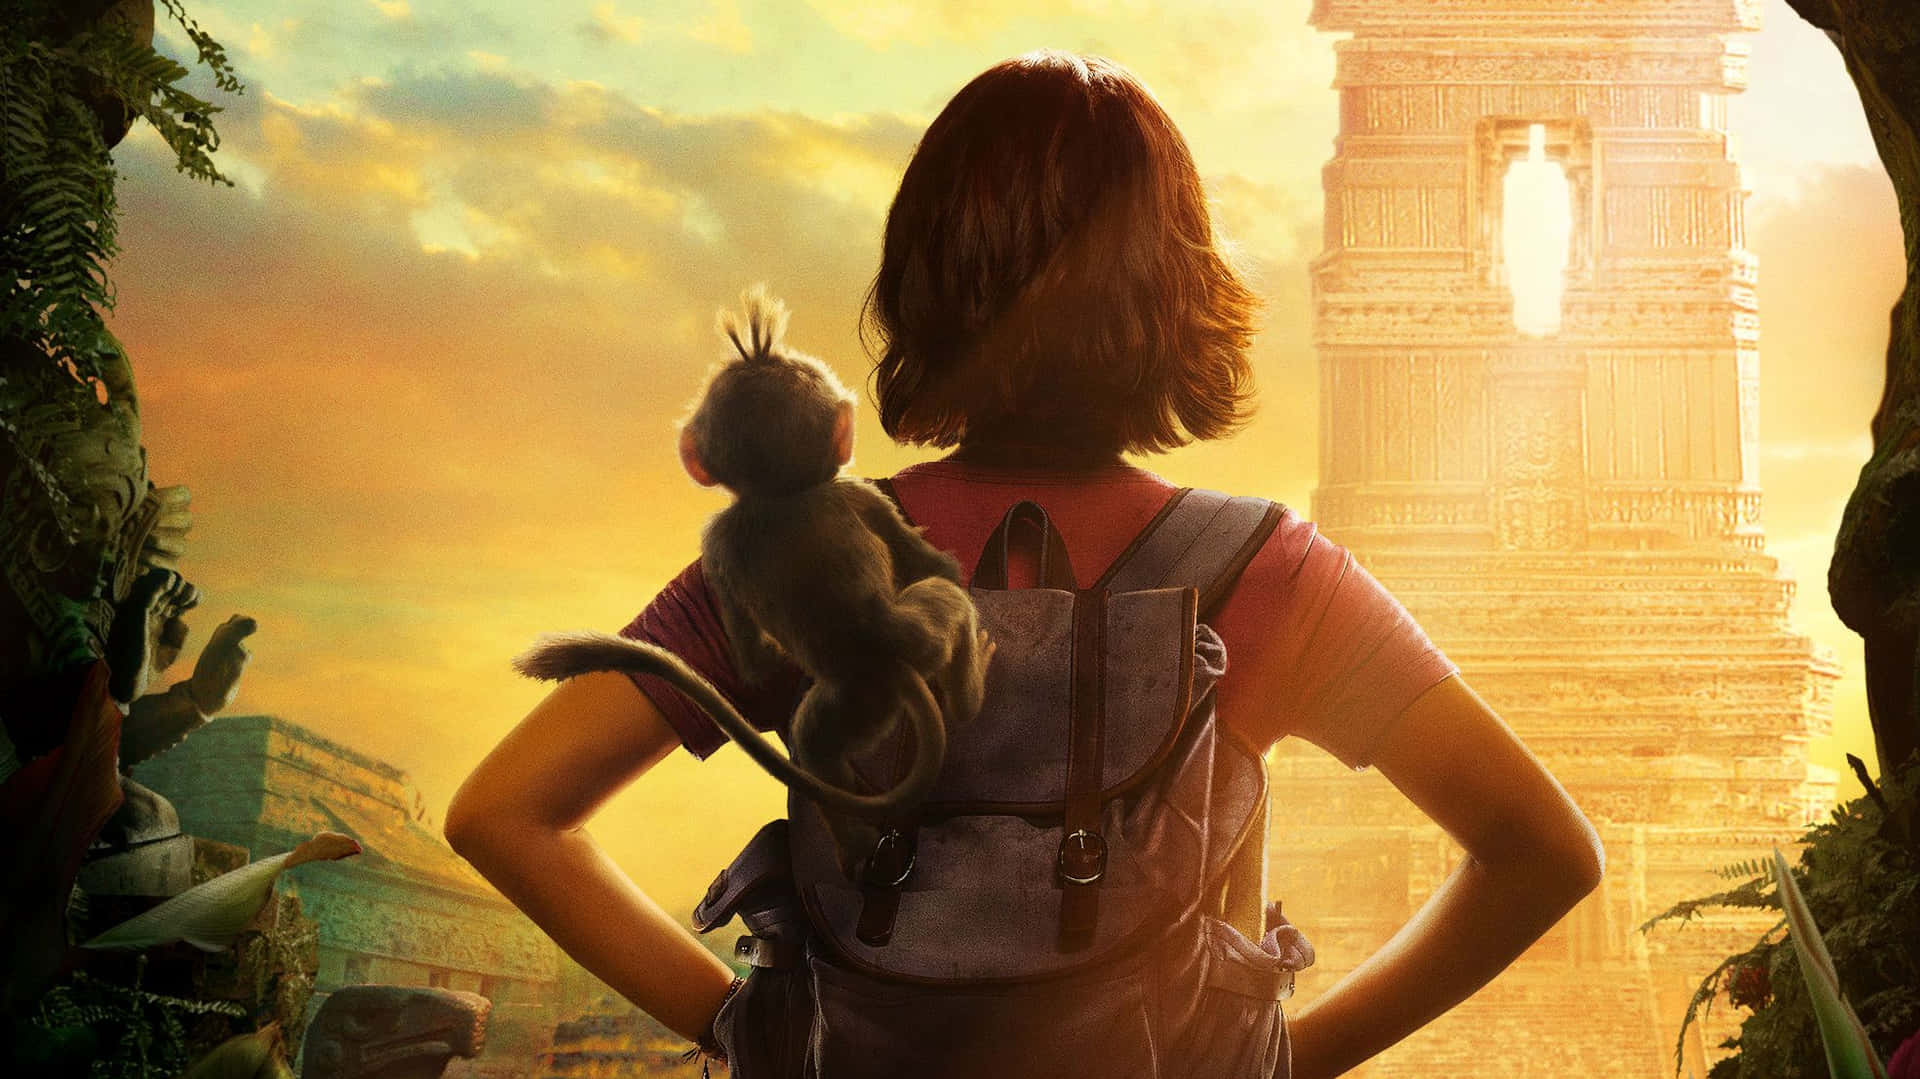 Join Dora The Explorer's Exciting Adventures In The World Around Her!